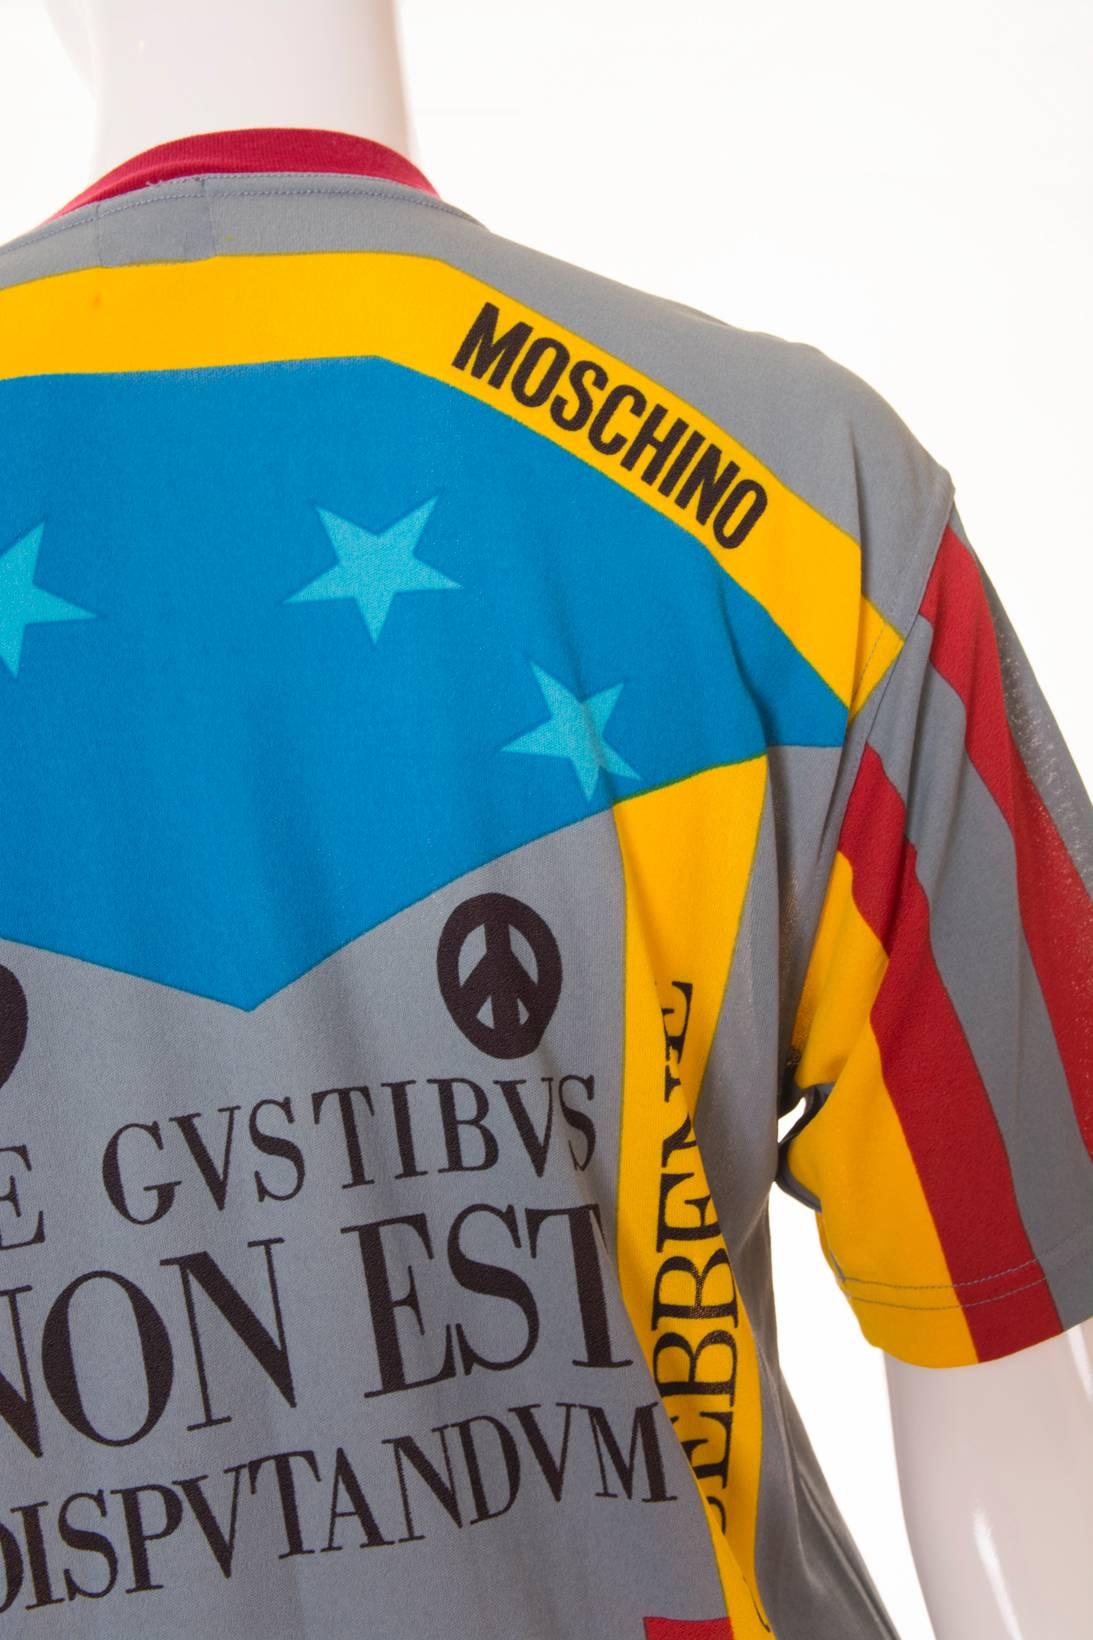 Moschino 'Ready to Where?' Cyclist Jersey In Good Condition For Sale In Brunswick West, Victoria